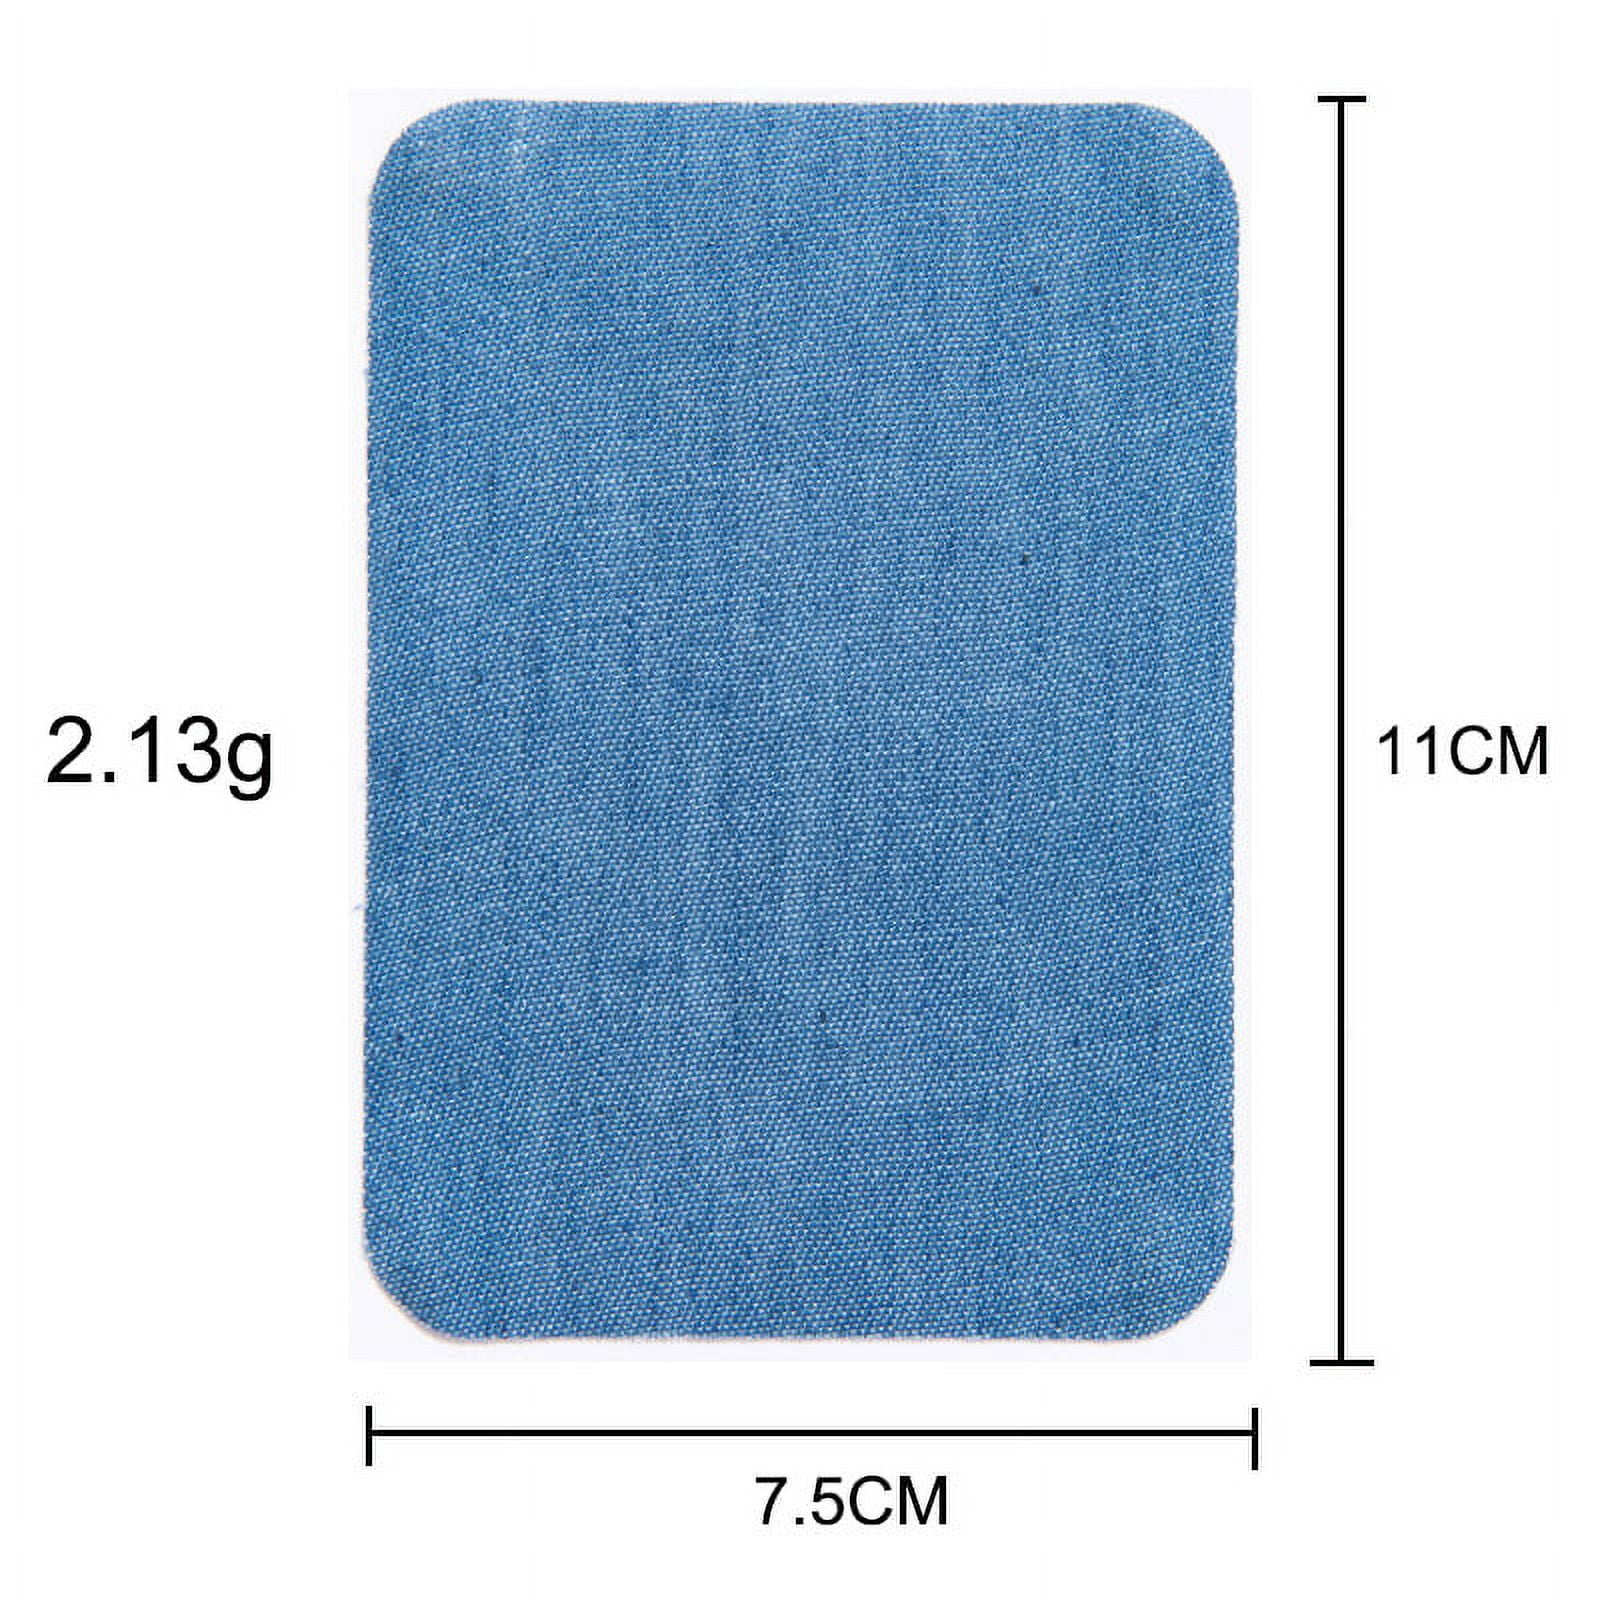 Multiqon Iron-On Denim Patches for Jeans Strongest Glue Cotton Best Heat and Bond Patches for Clothing Repair Ripped Jeans, Jacket, Elbow, Knees Shad